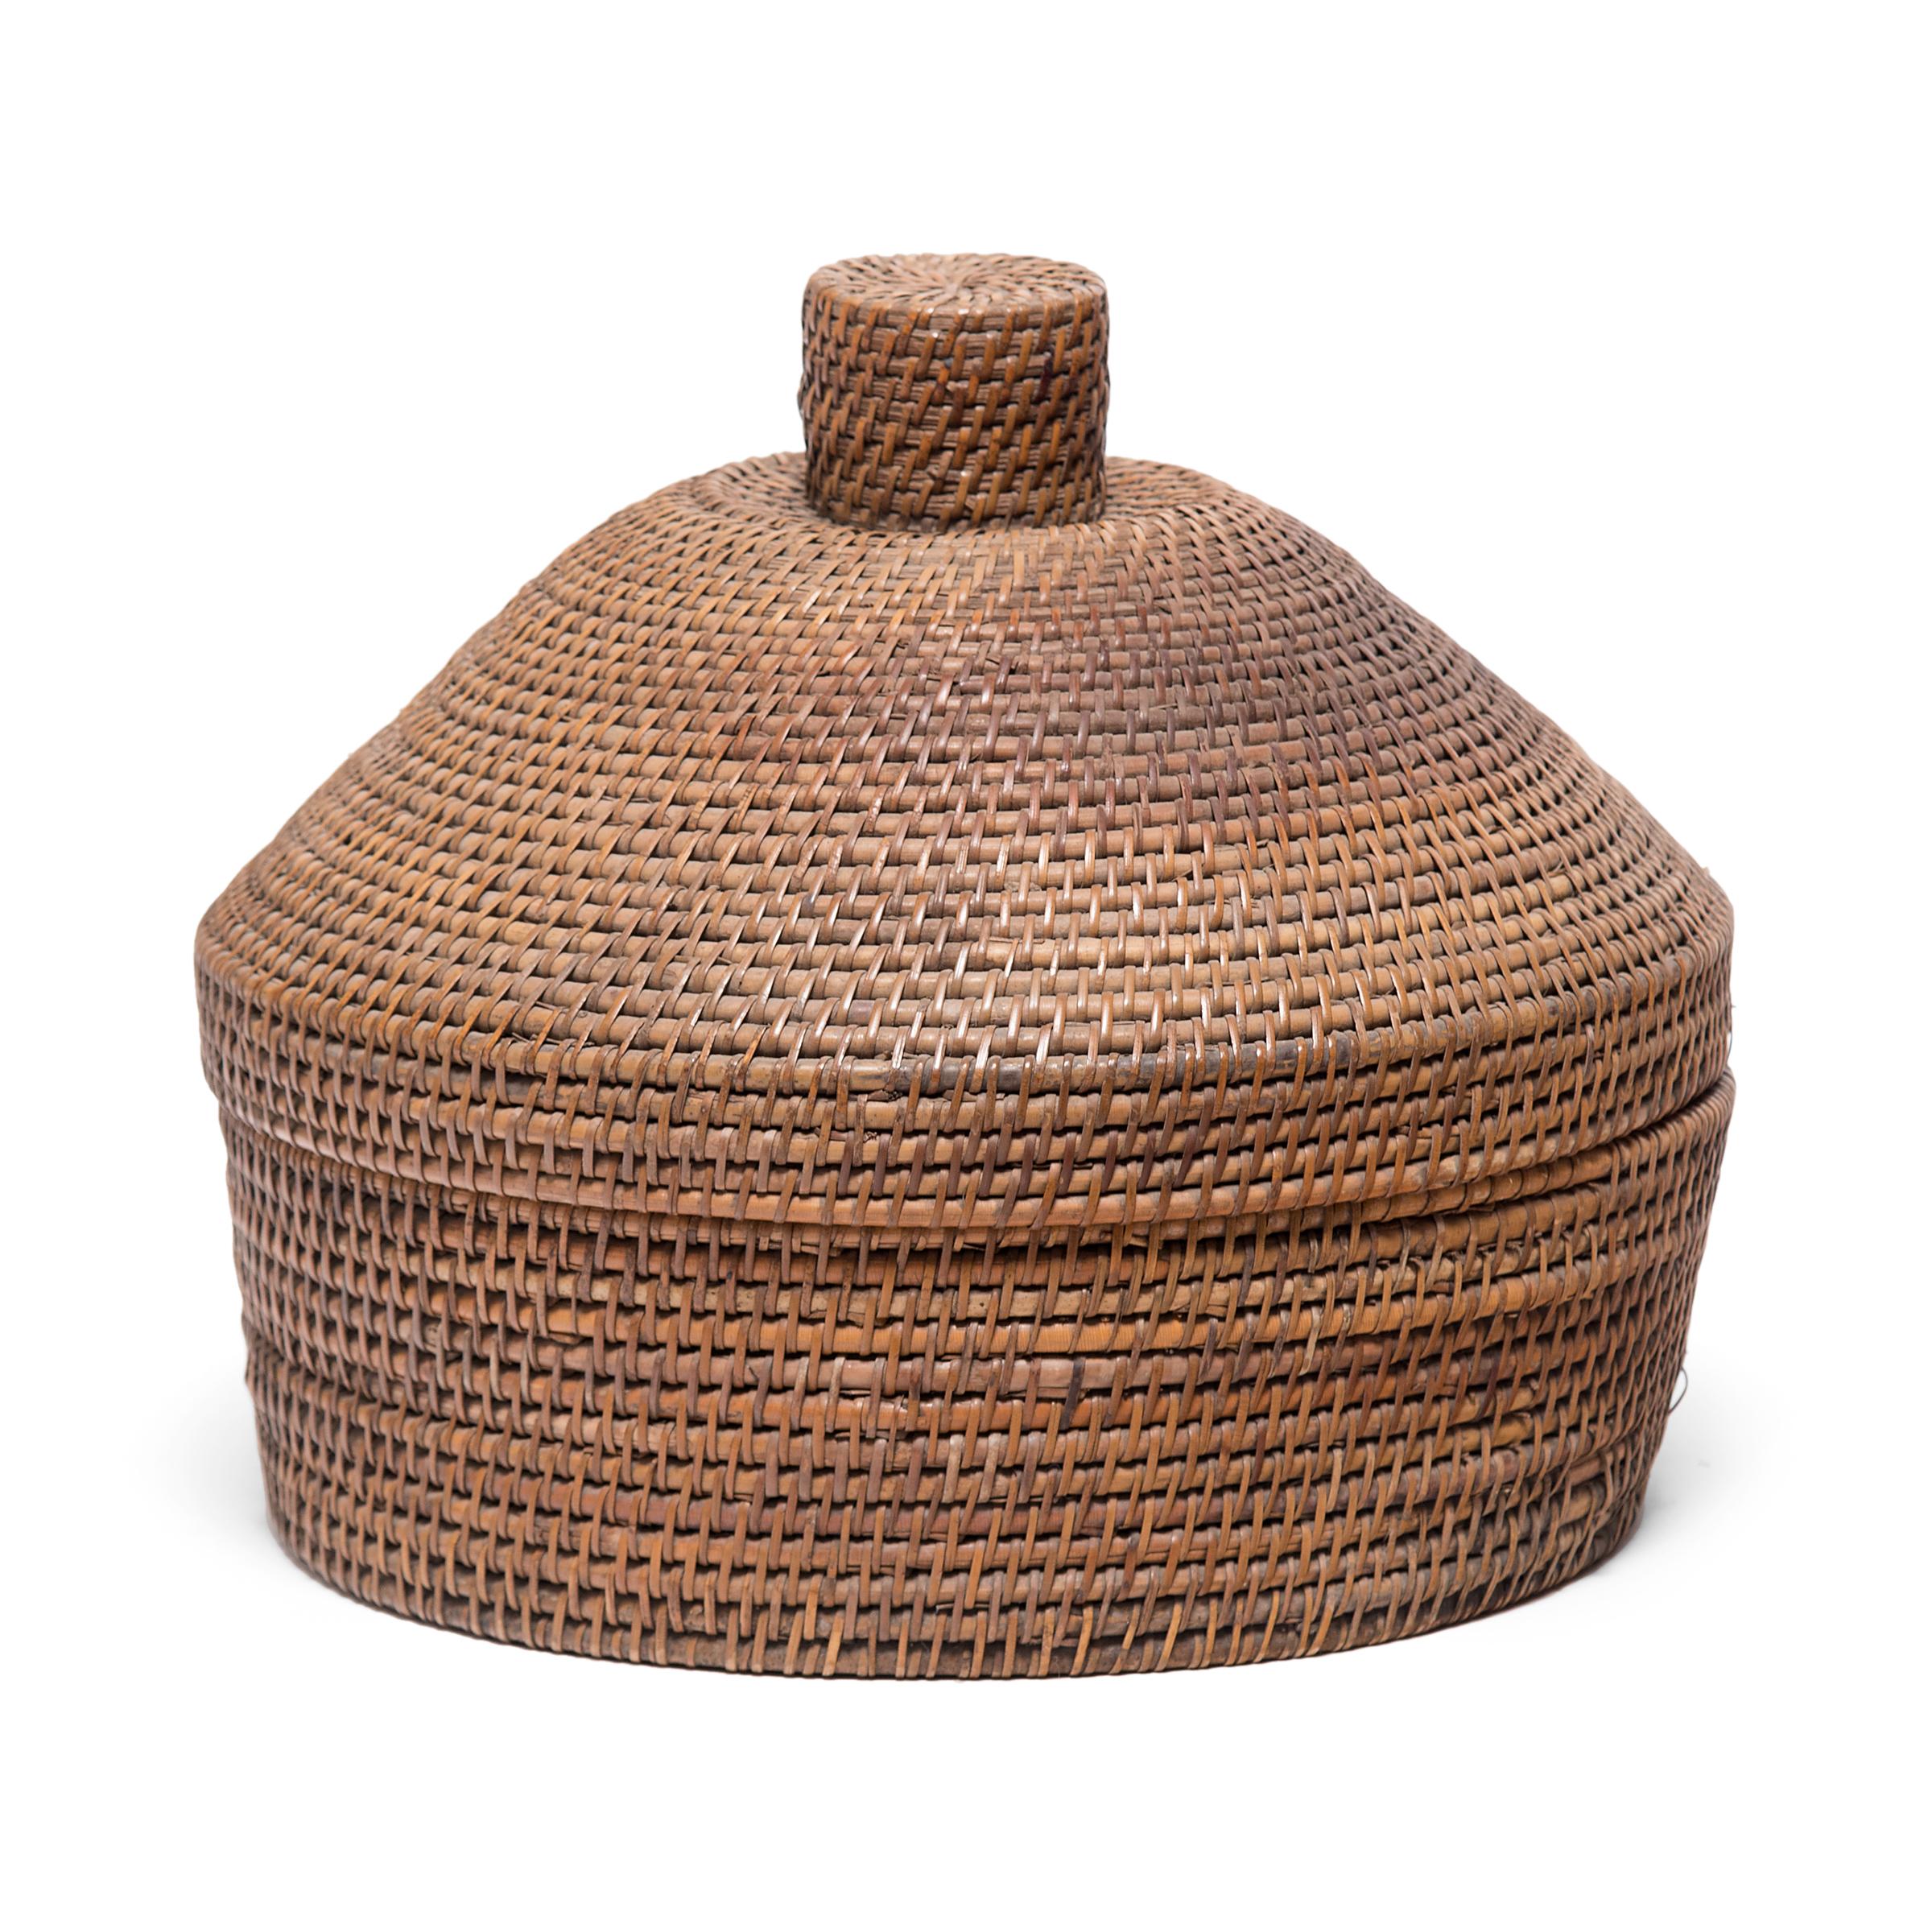 Qing Provincial Chinese Woven Summer Hat Box, circa 1850